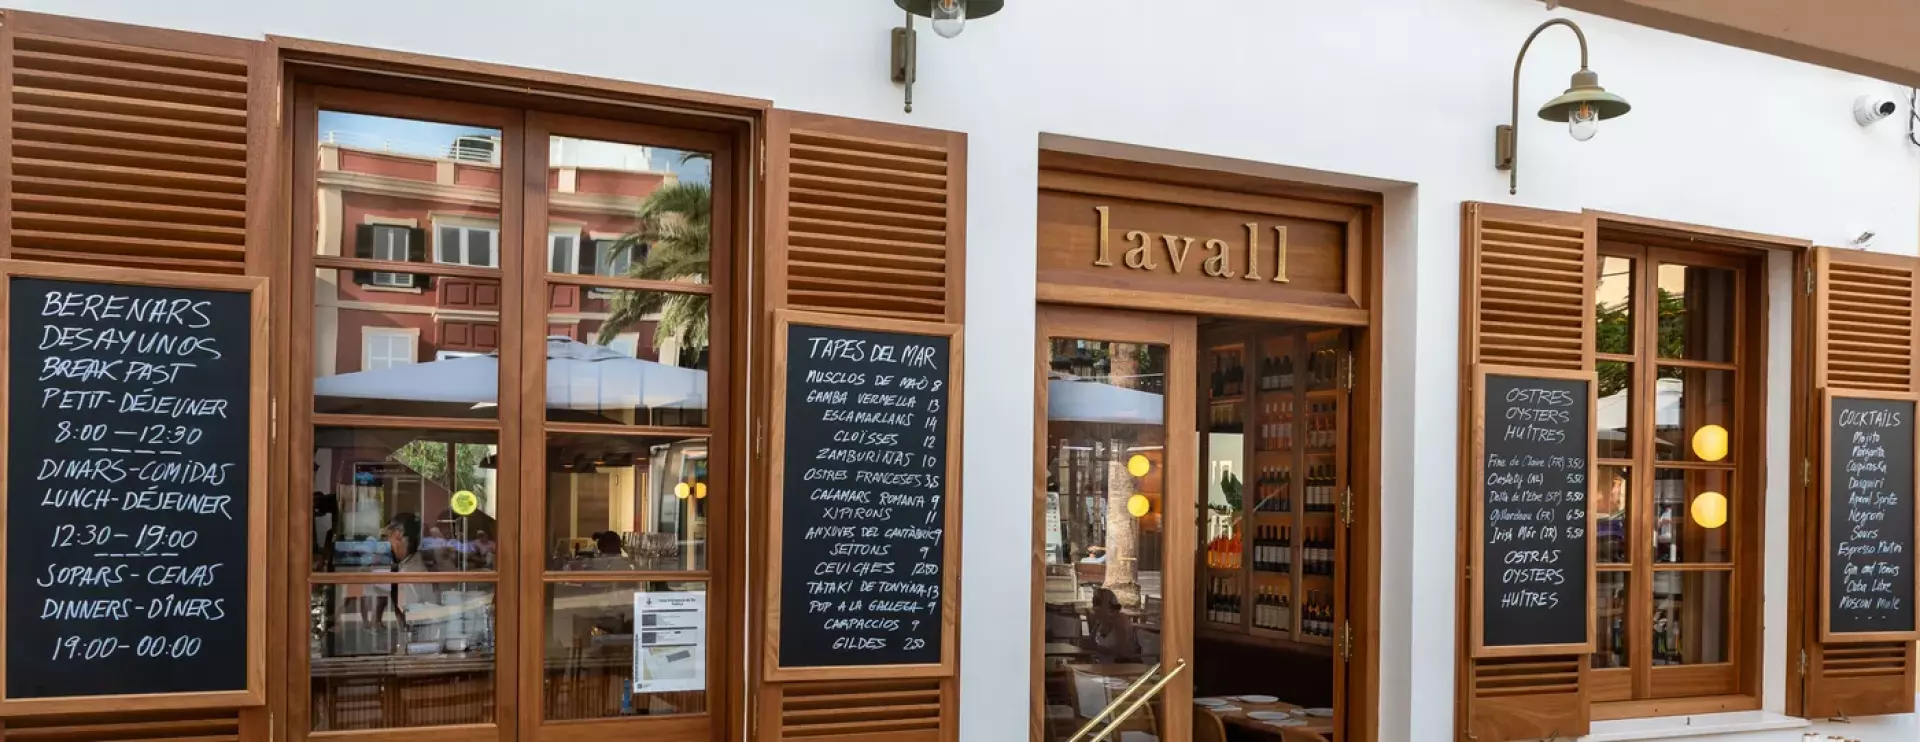 Image of Lavall